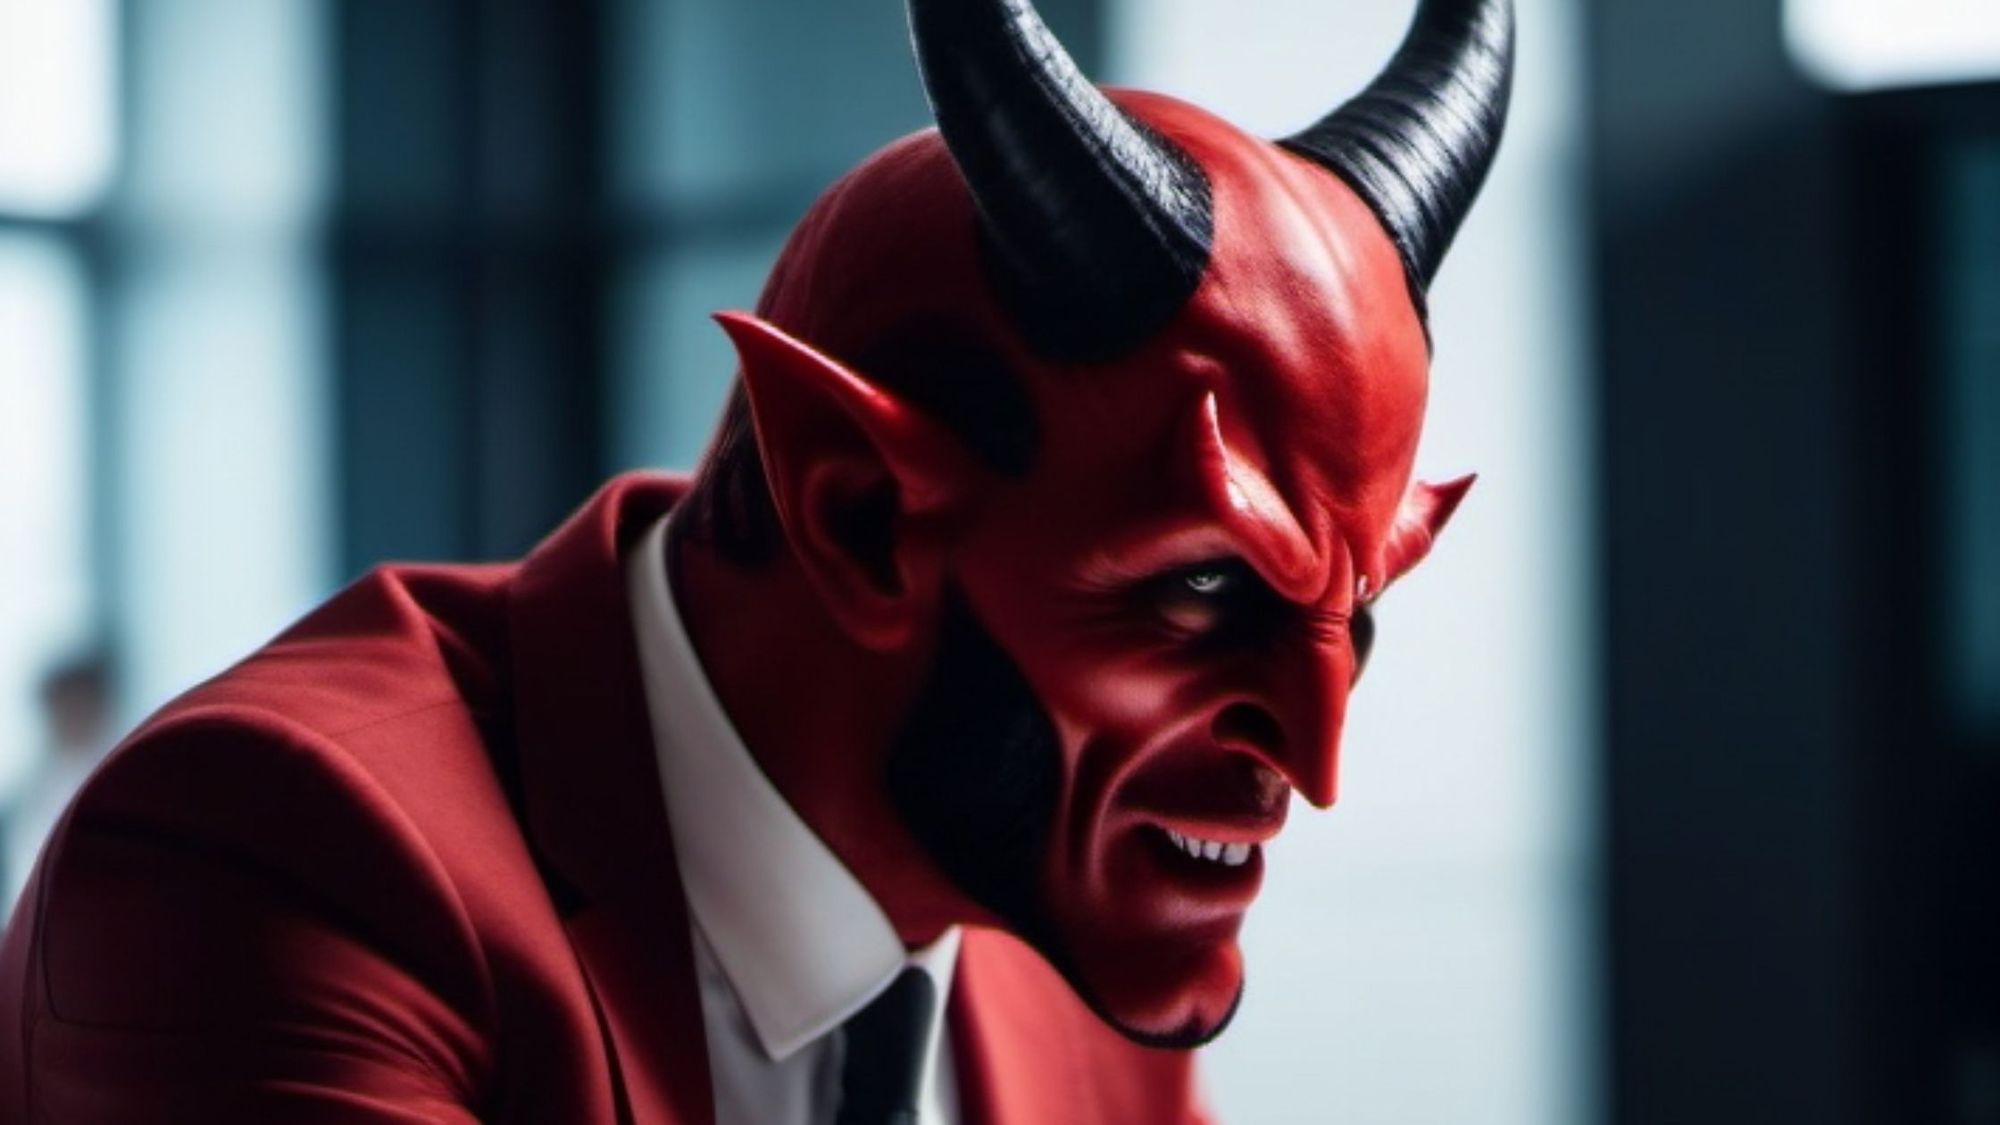 7 Ways To Deal With The Devil In The Workplace